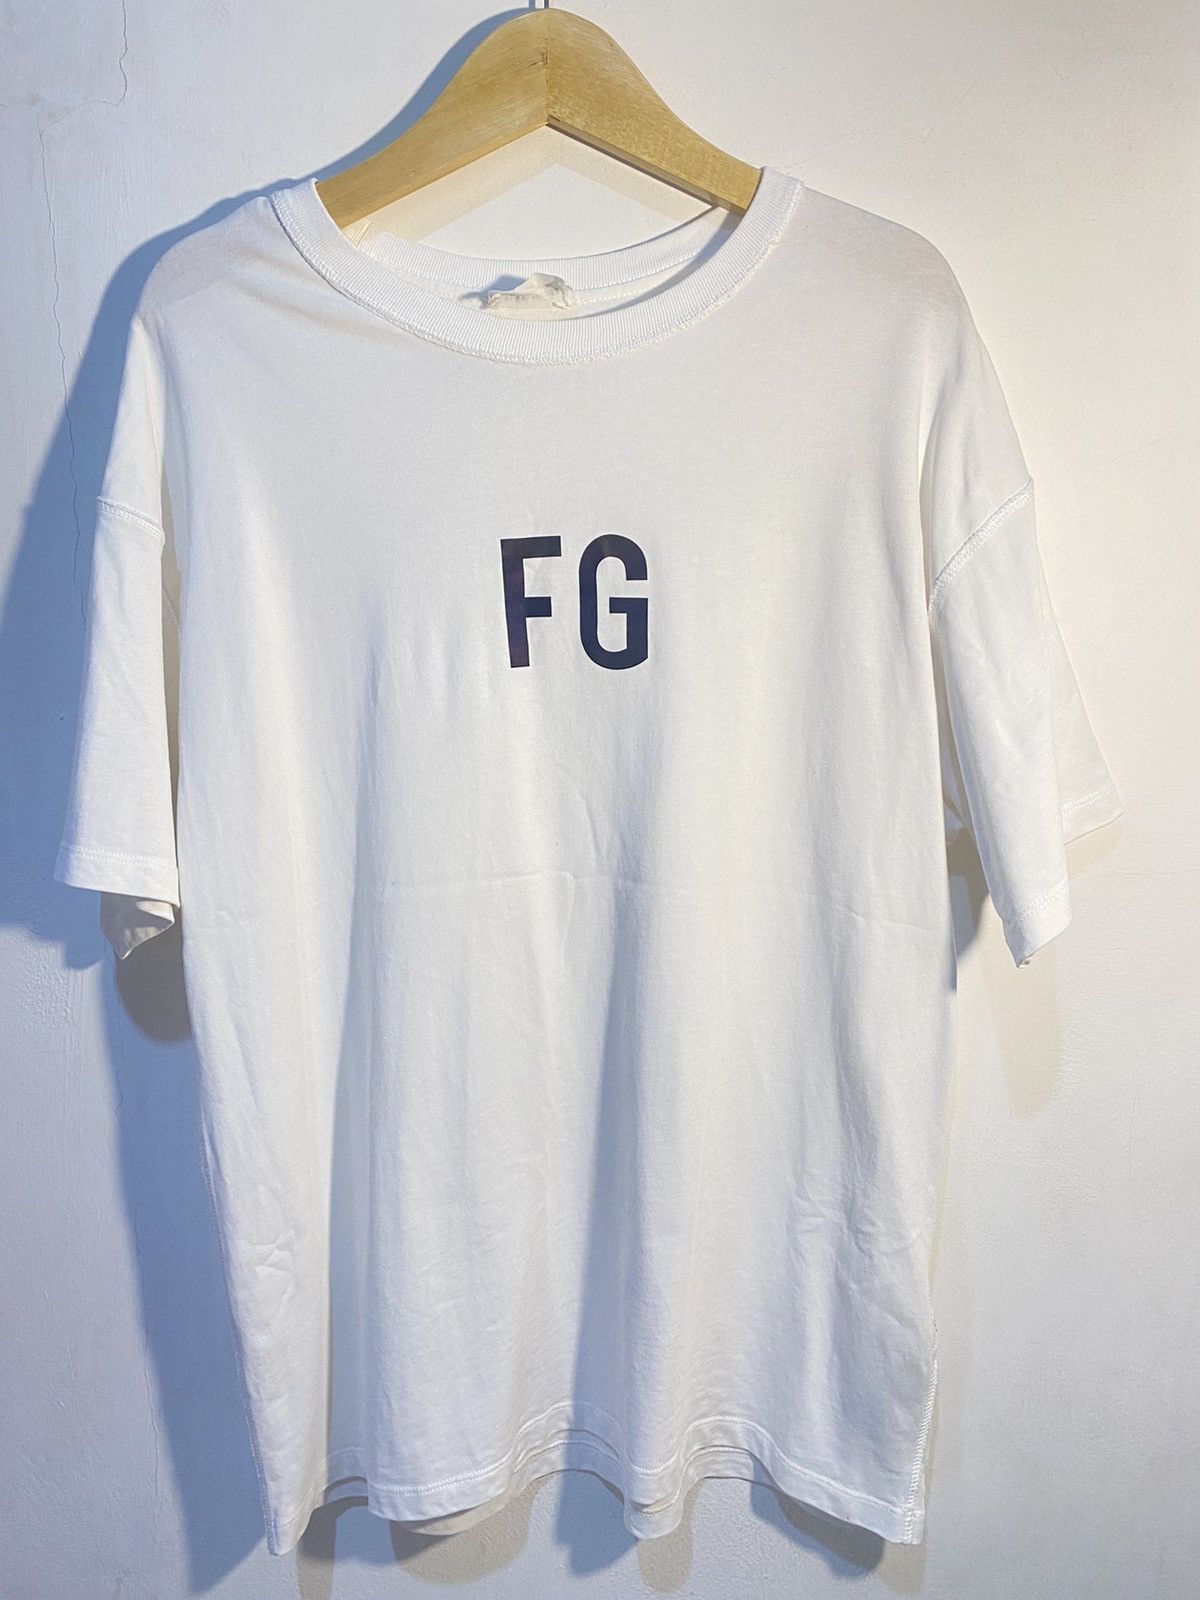 Fear of God Fear Of God Sixth 6th Collection 3M Reflective FG Logo Tee |  Grailed